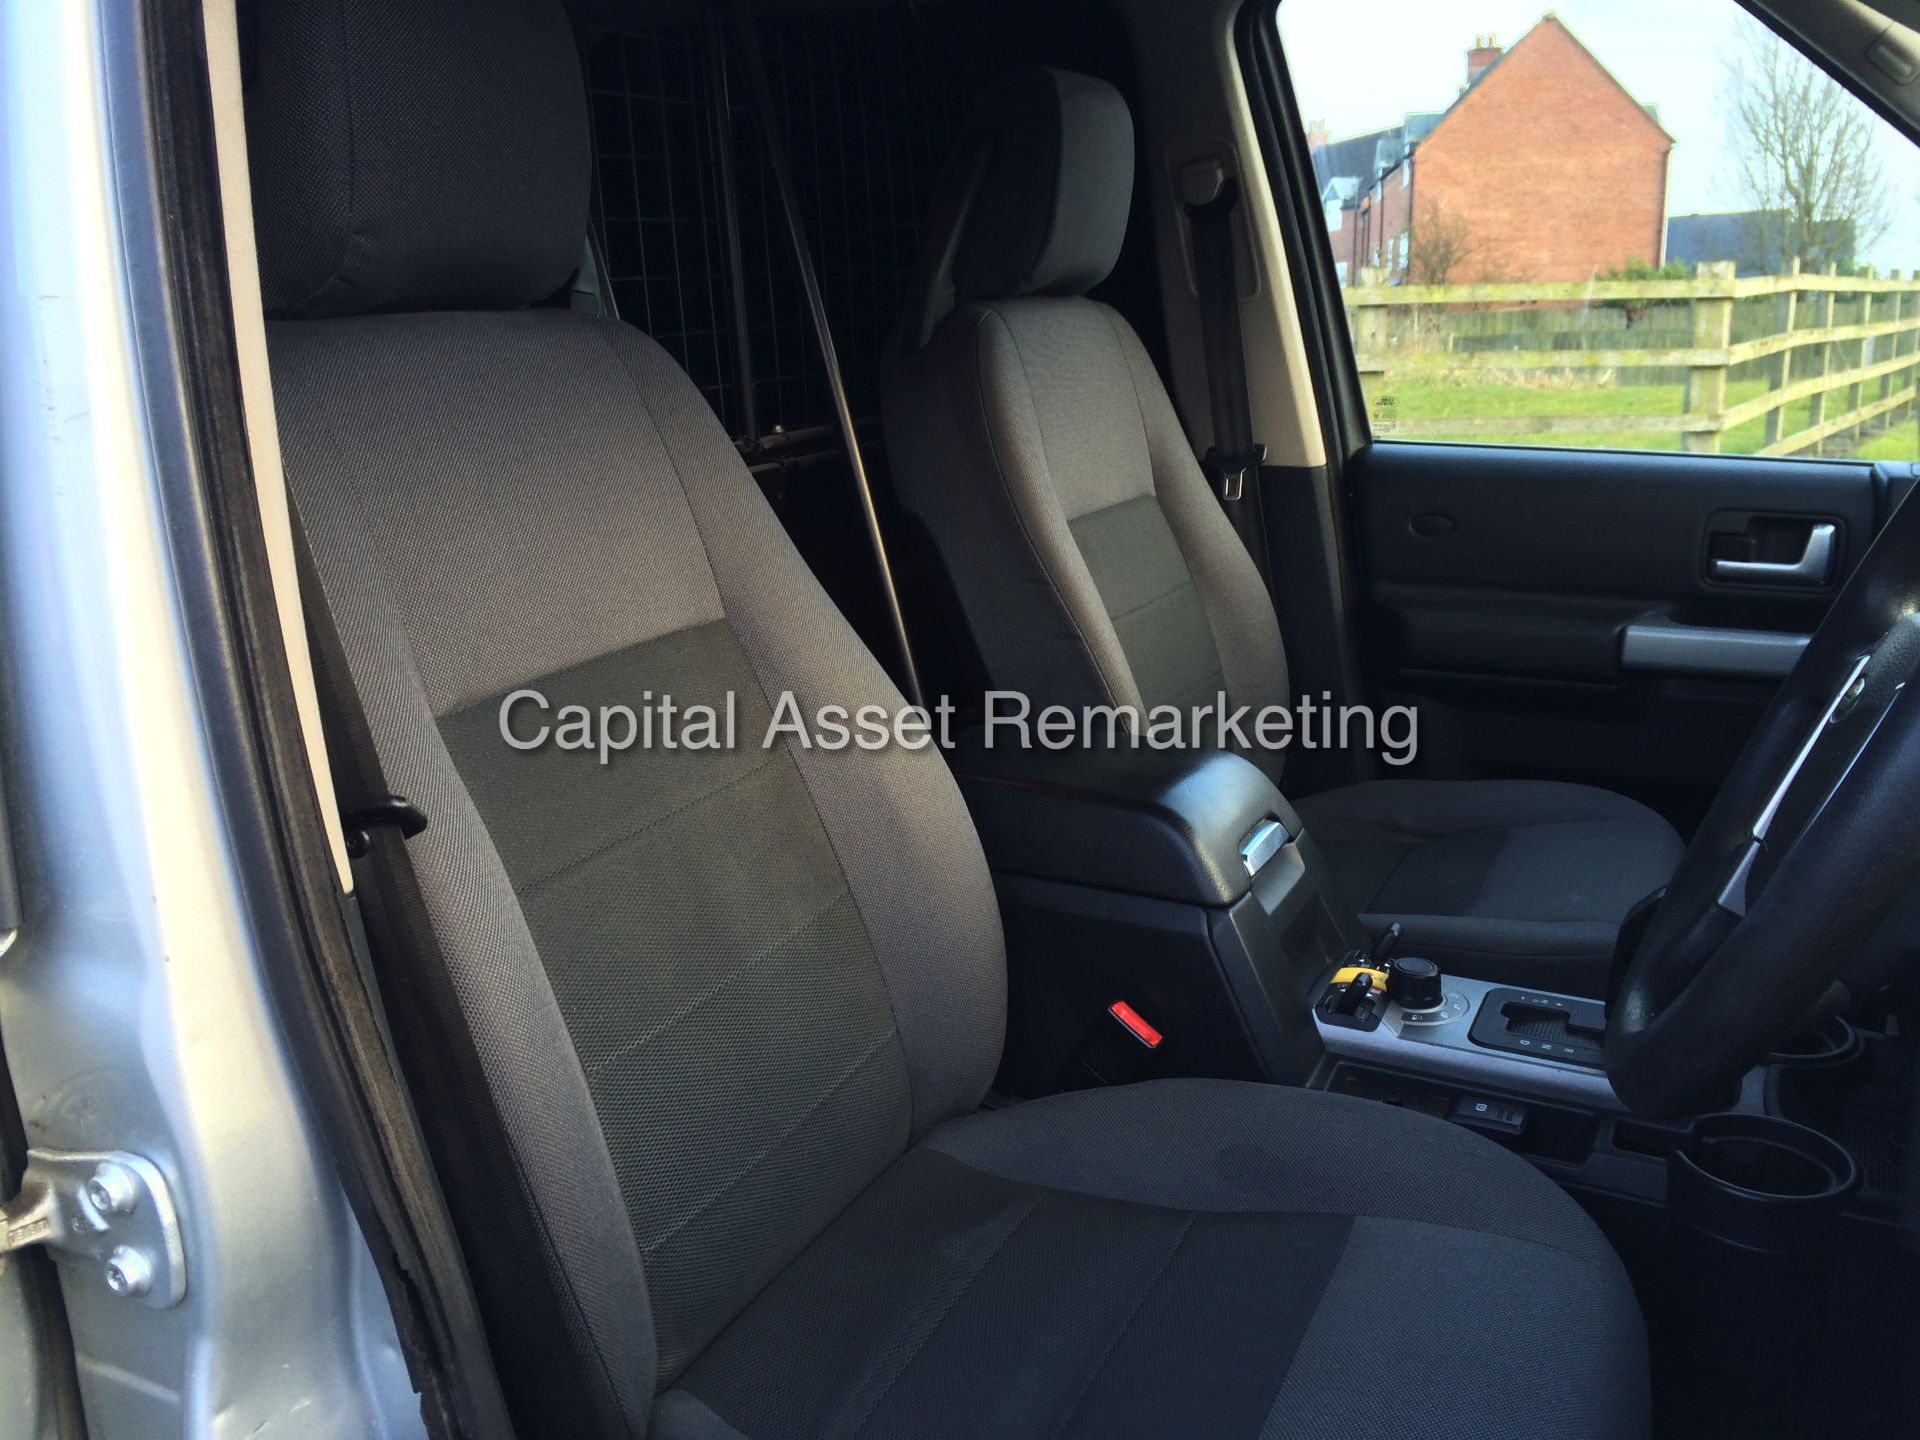 LANDROVER DISCOVERY 3 "TDV6" AUTOMATIC - 1 PREVIOUS OWNER FROM NEW - AIR SUSPENSION - PRIVACY GLASS! - Image 11 of 18